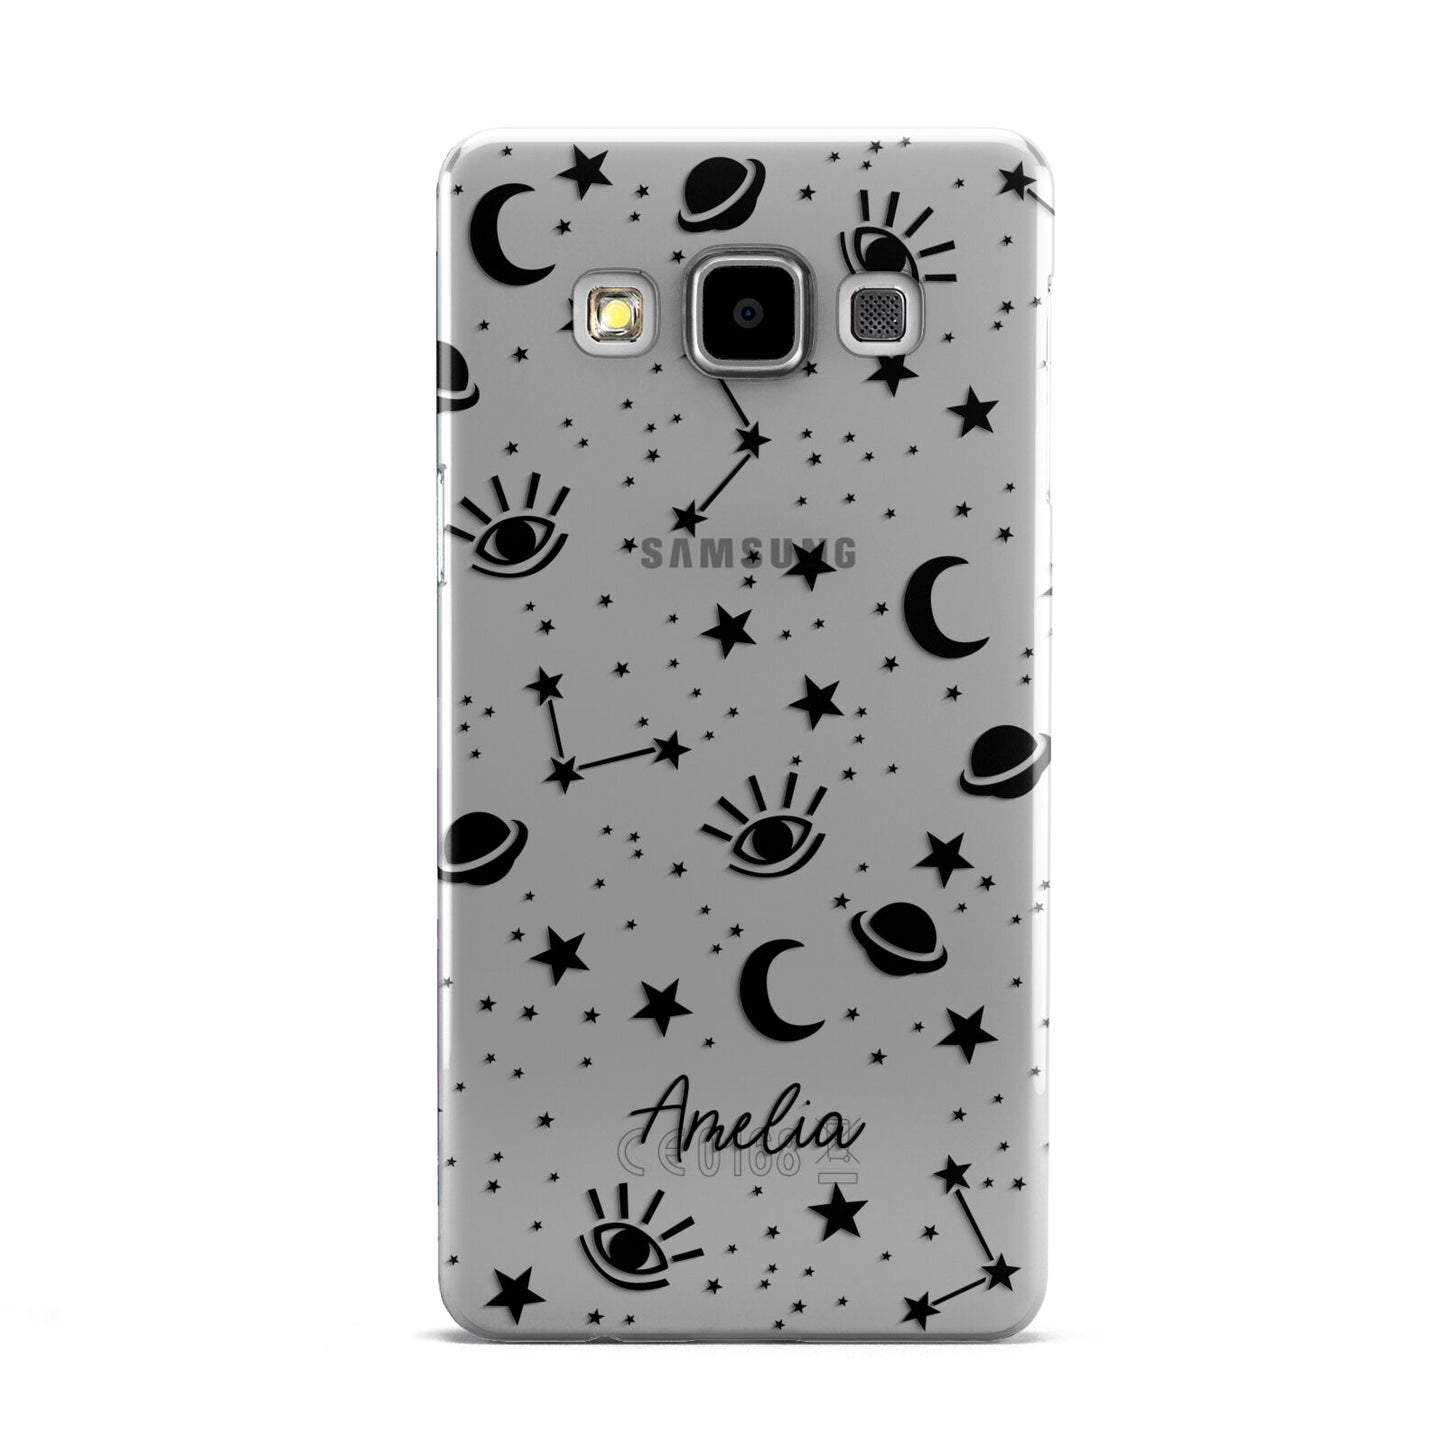 Monochrome Zodiac Constellations with Name Samsung Galaxy A5 Case